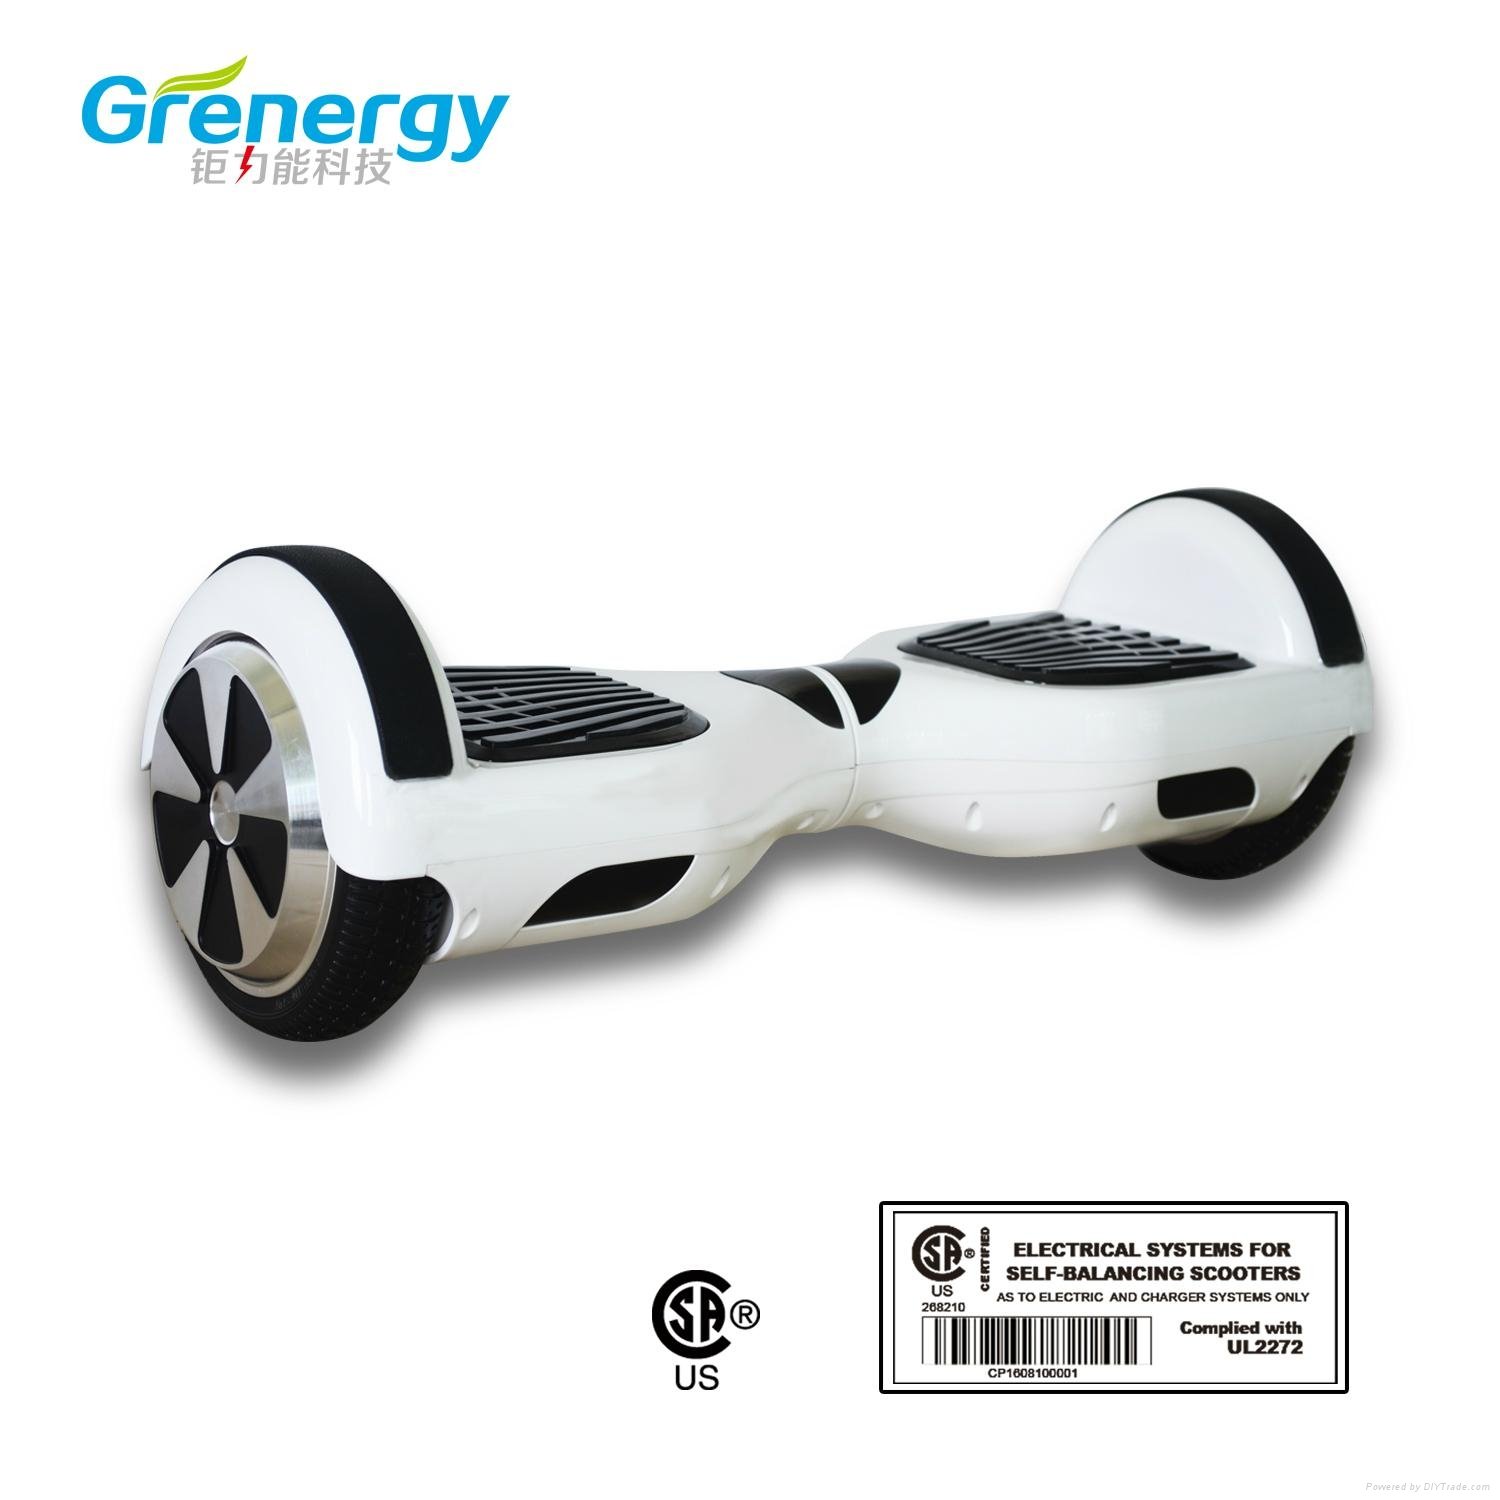 6.5inch UL2272 balance scooter electric hoverboard from china factory - F1  - Grenergy (China Manufacturer) - Motorcycle - Vehicles Products